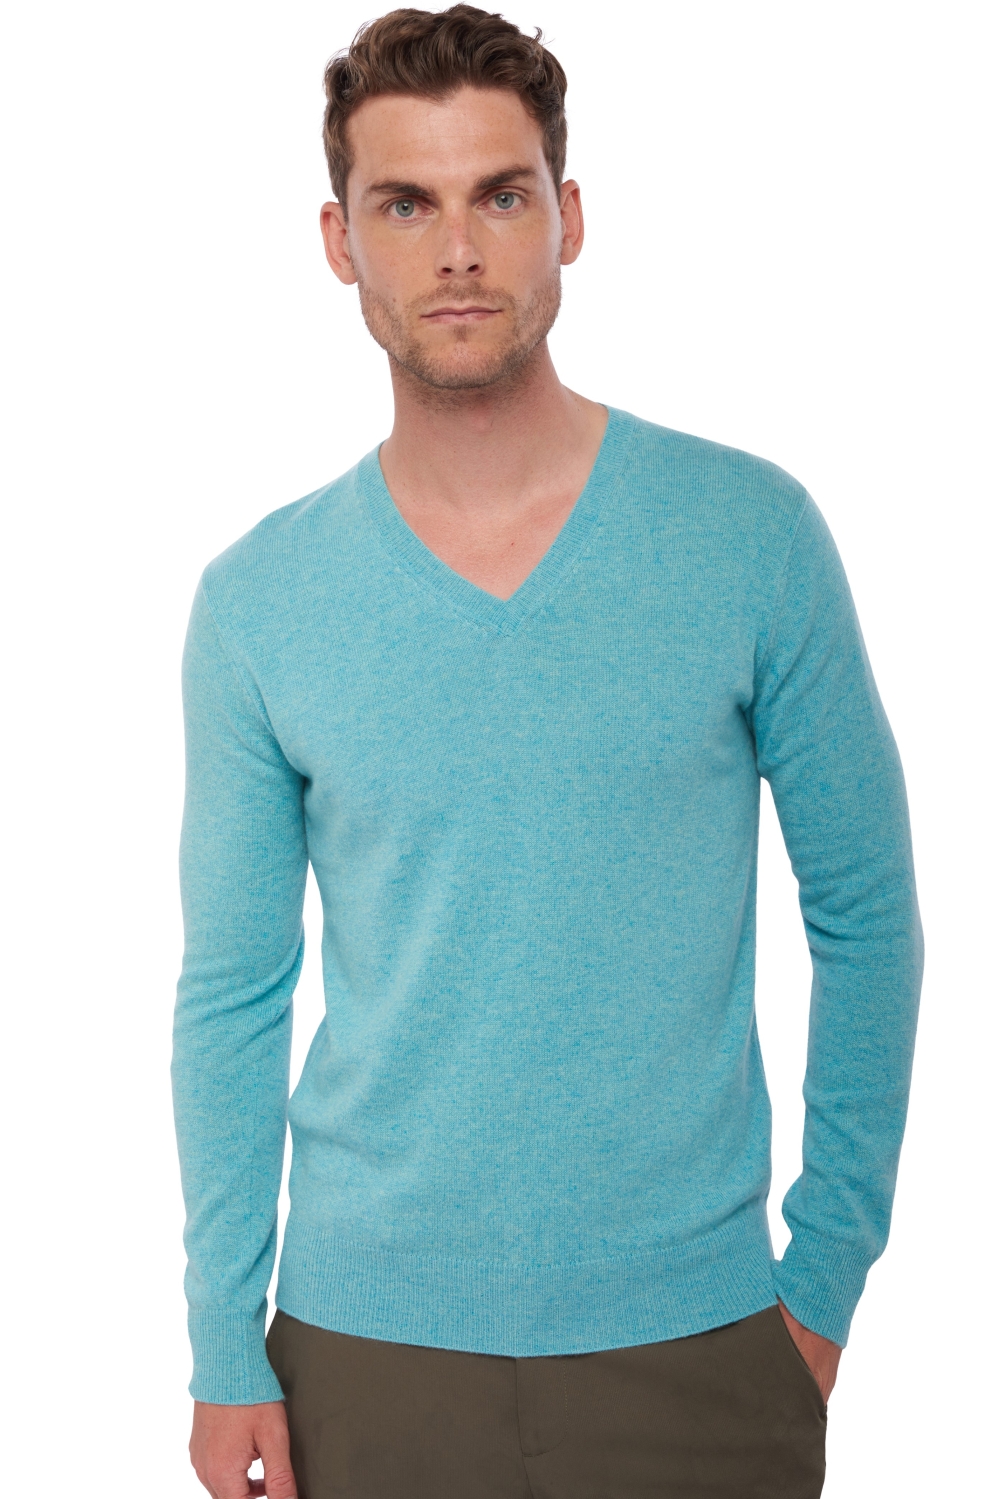 Cashmere men low prices tor first piscine m